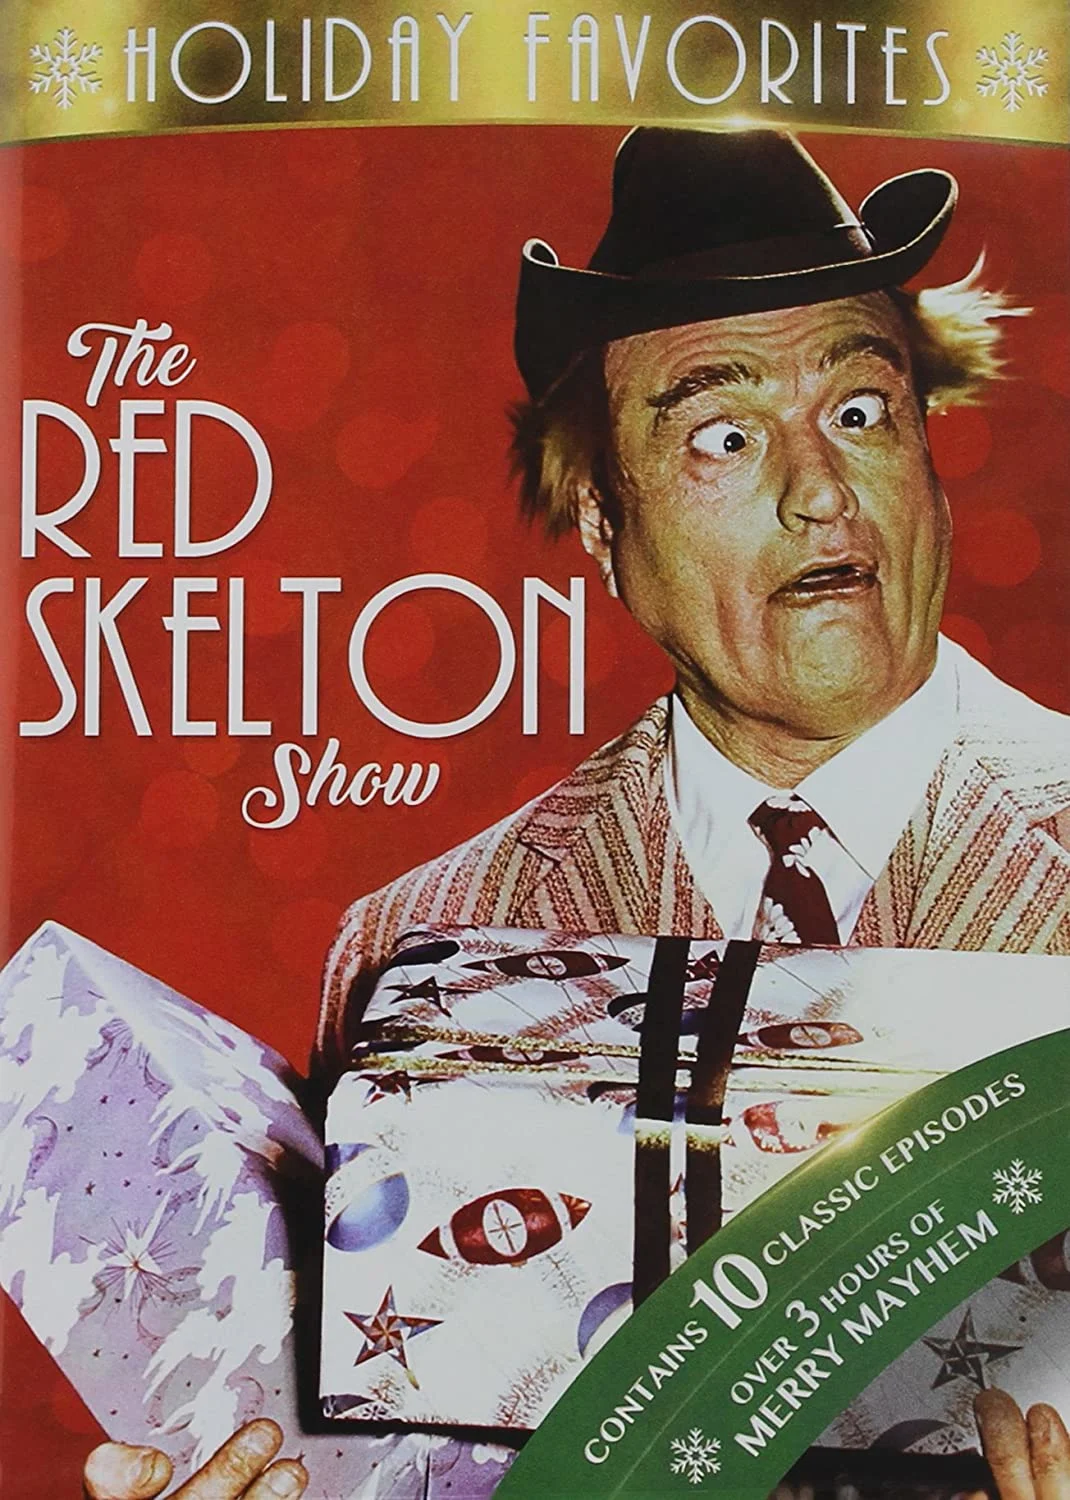 Red Skelton Show: Holiday Favourites (DVD)